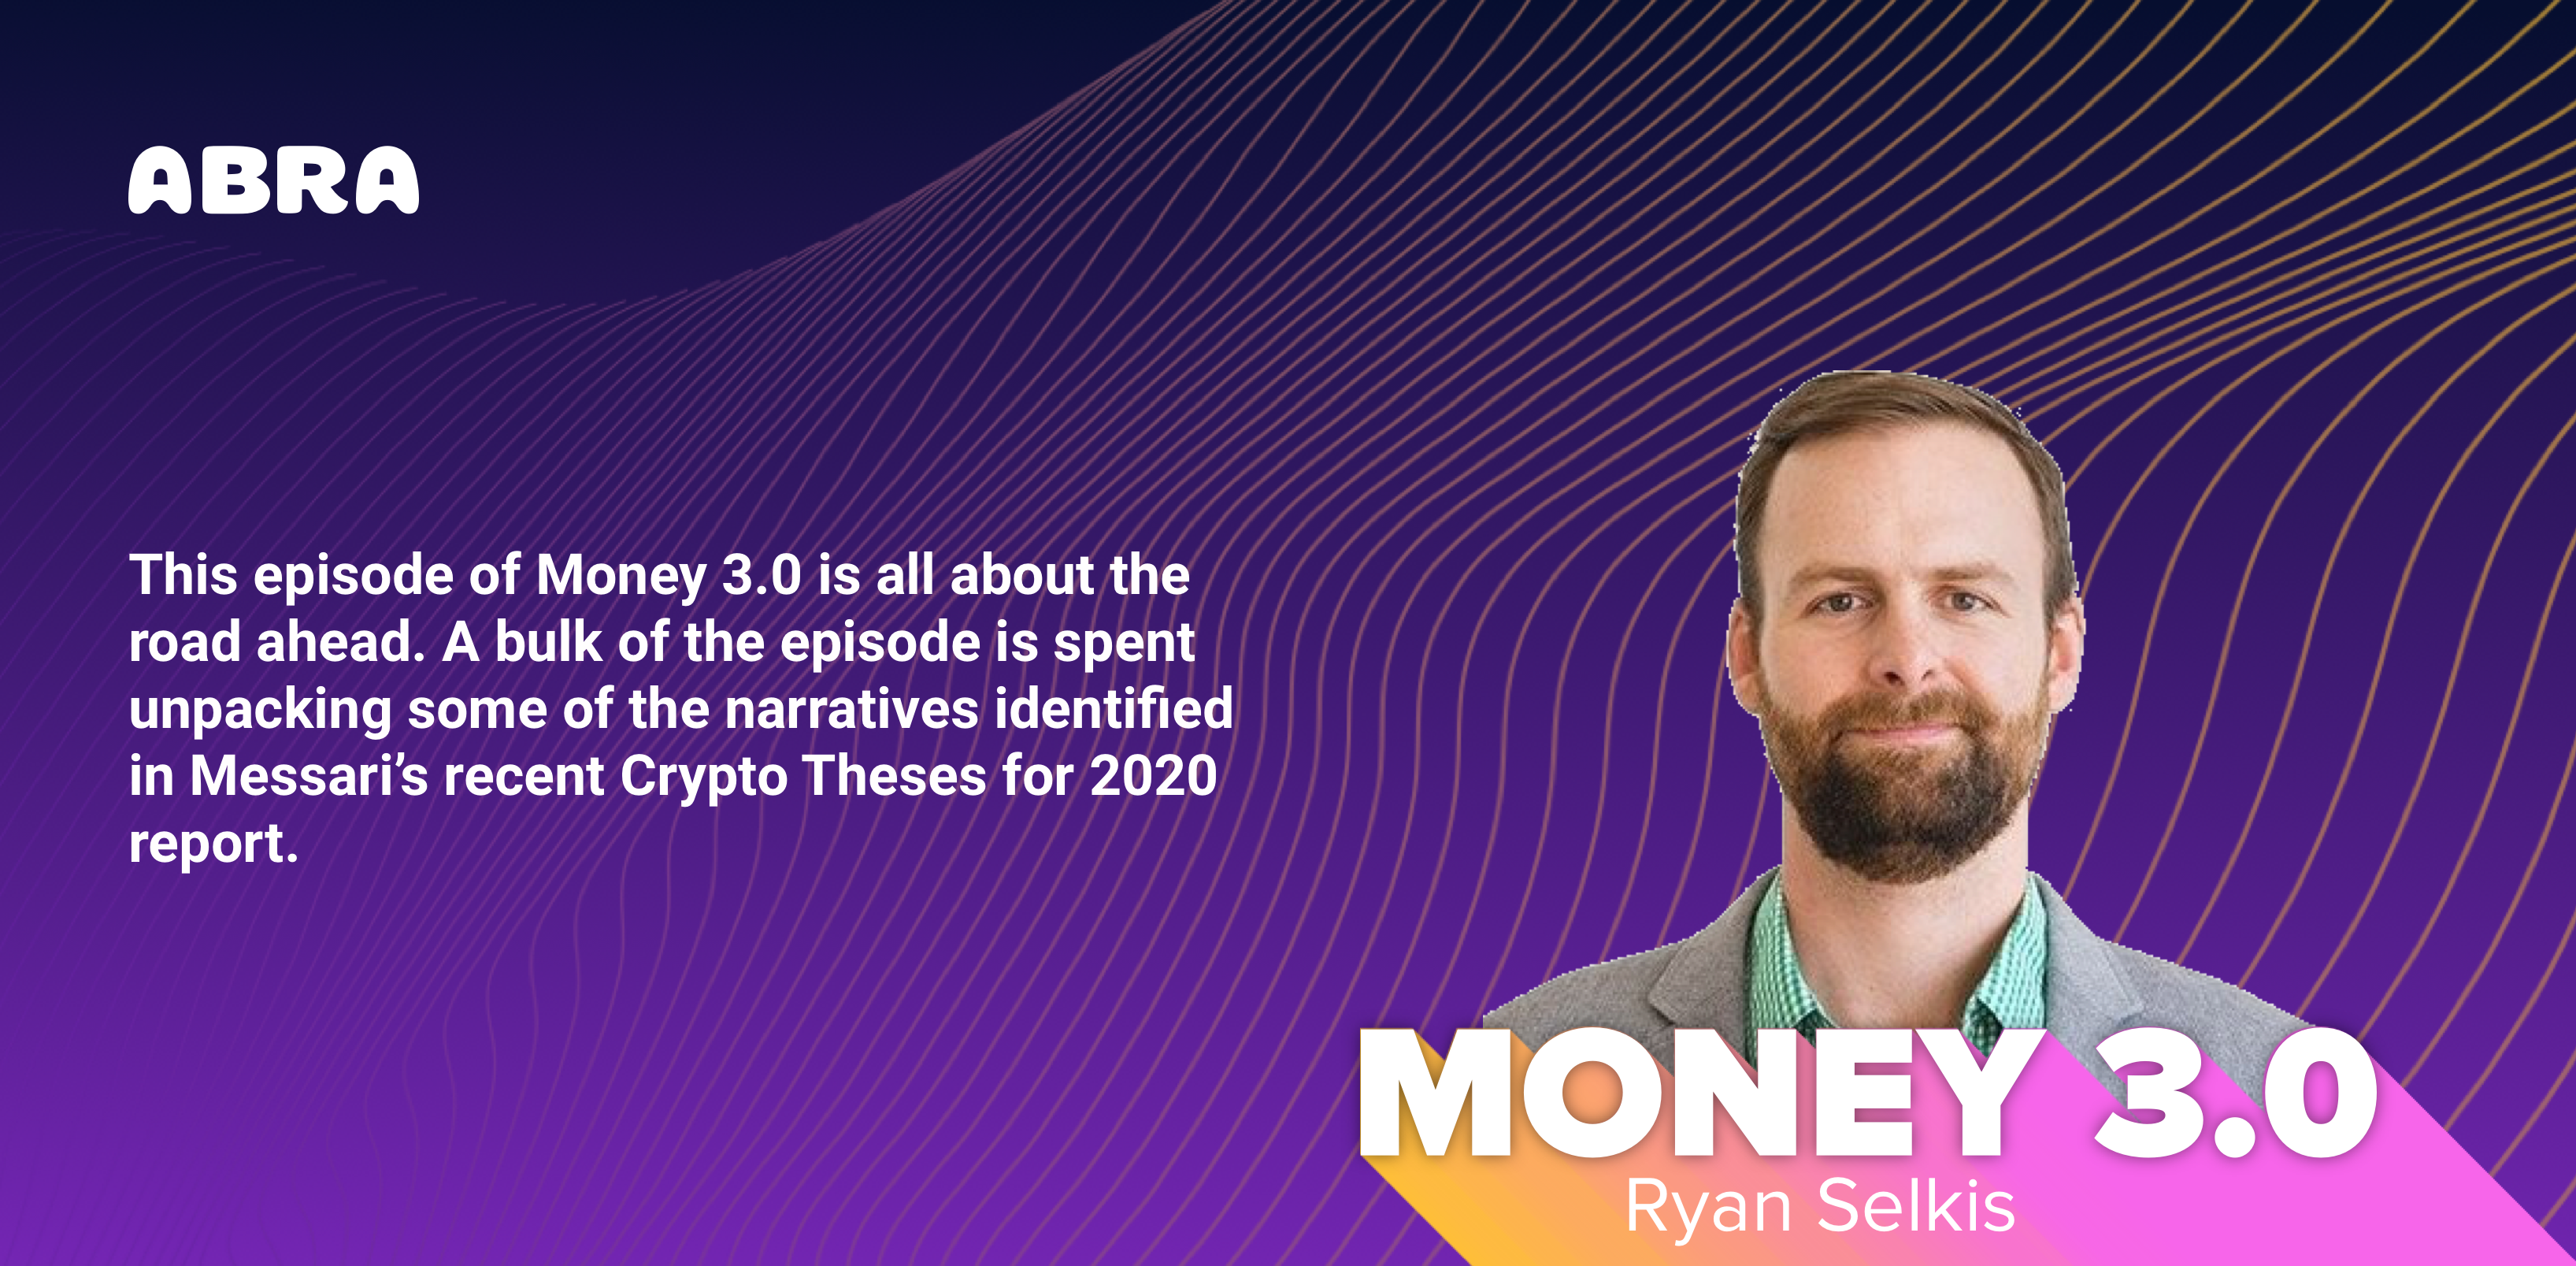 Money 3.0 and Ryan Selkis